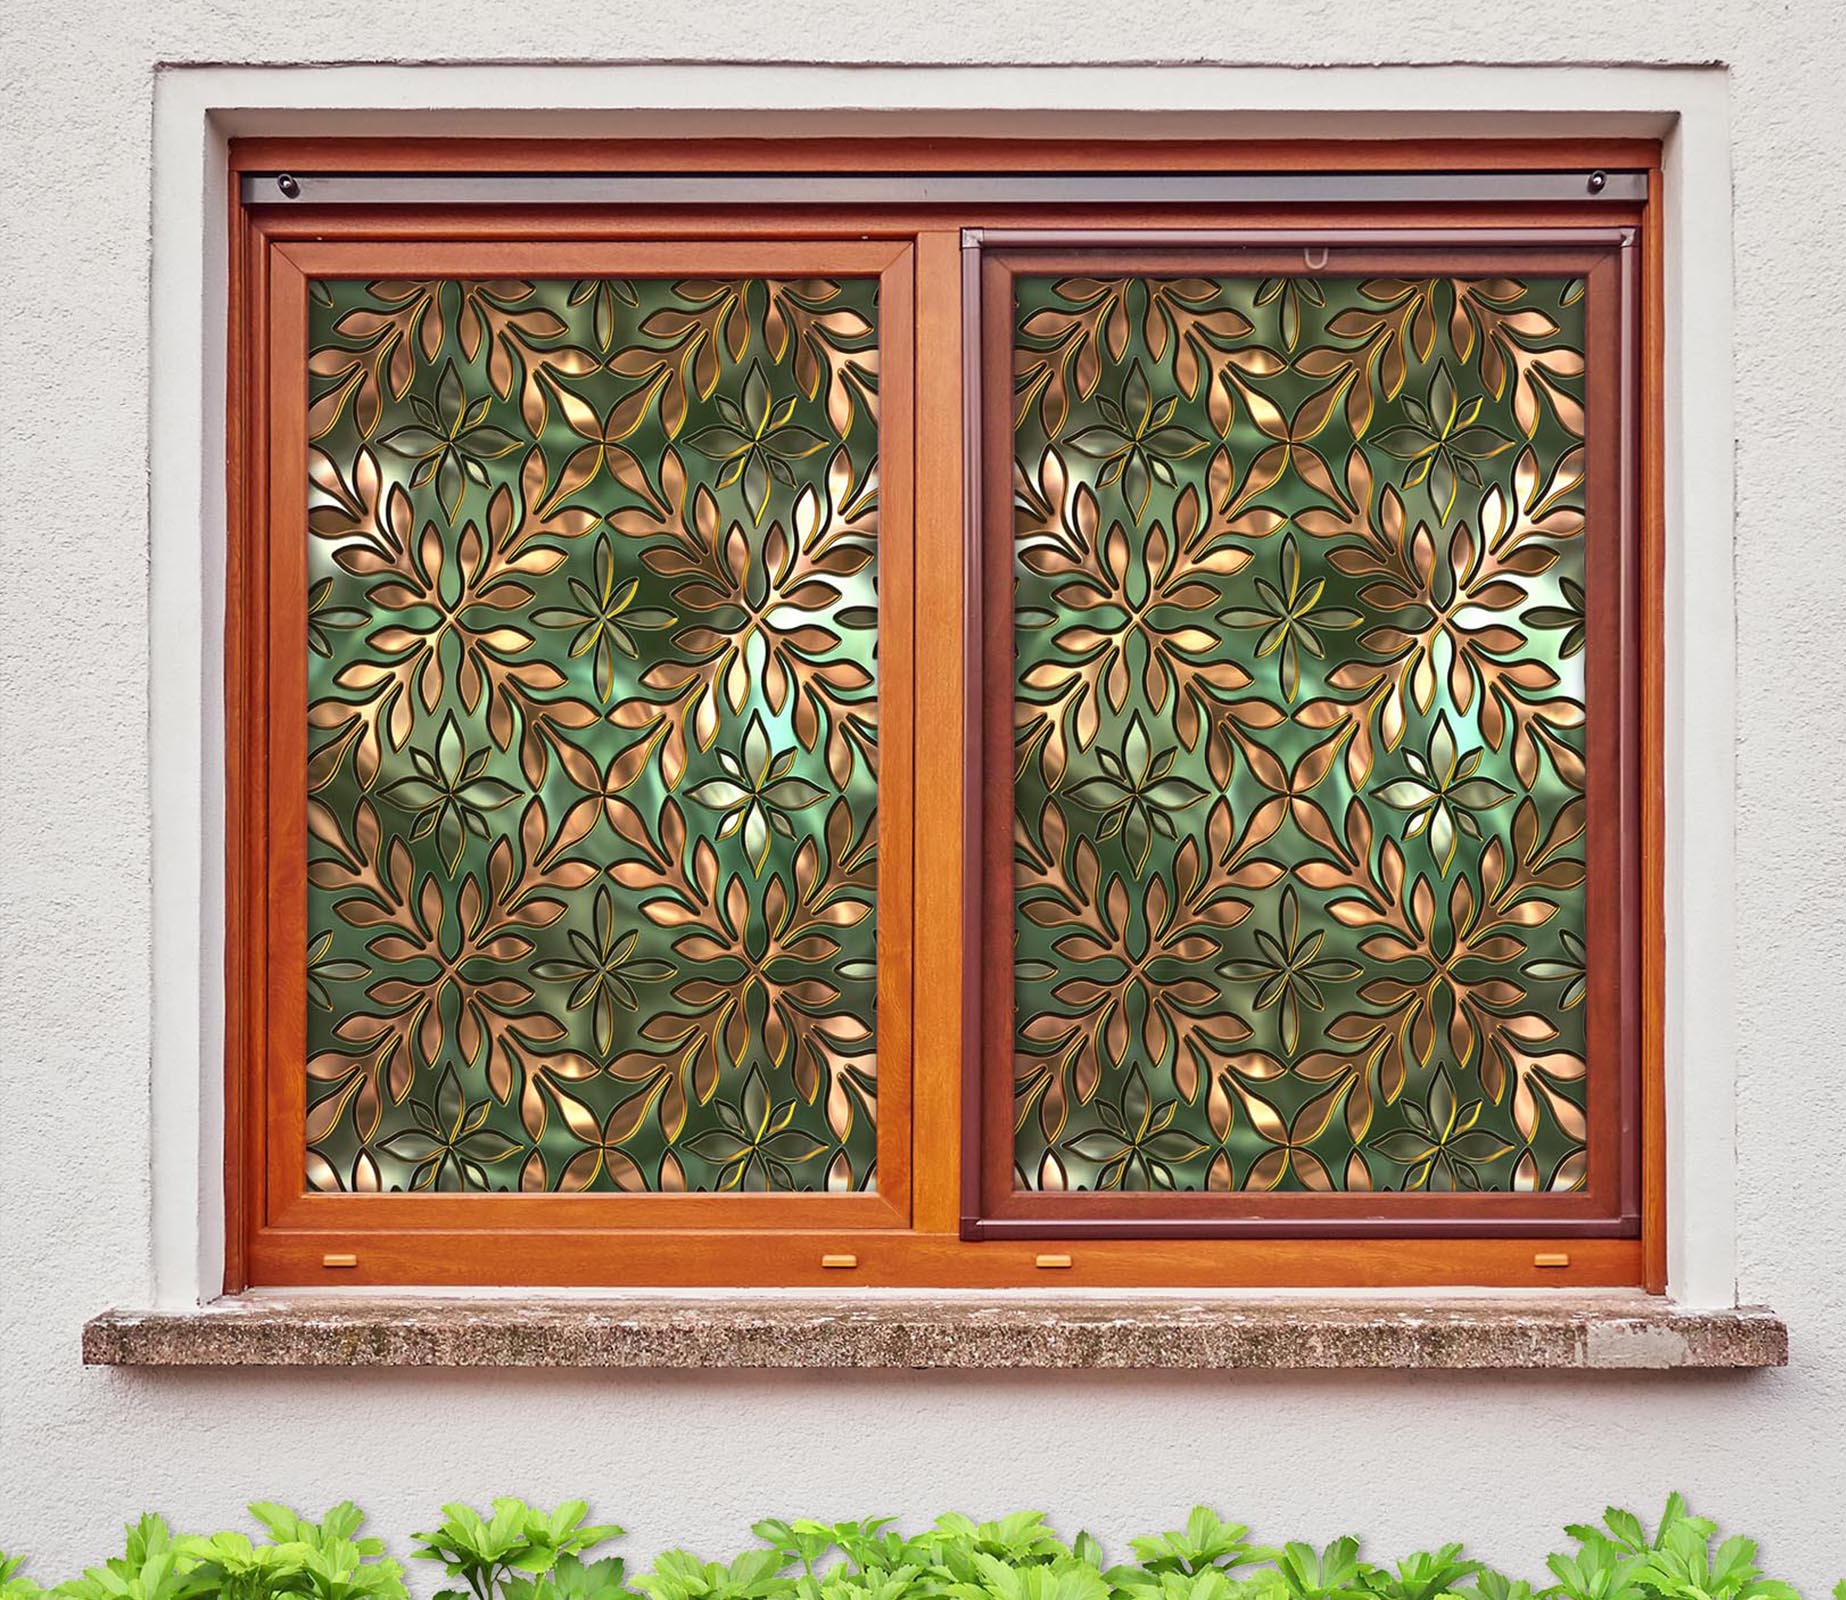 3D Golden Leaves 433 Window Film Print Sticker Cling Stained Glass UV Block